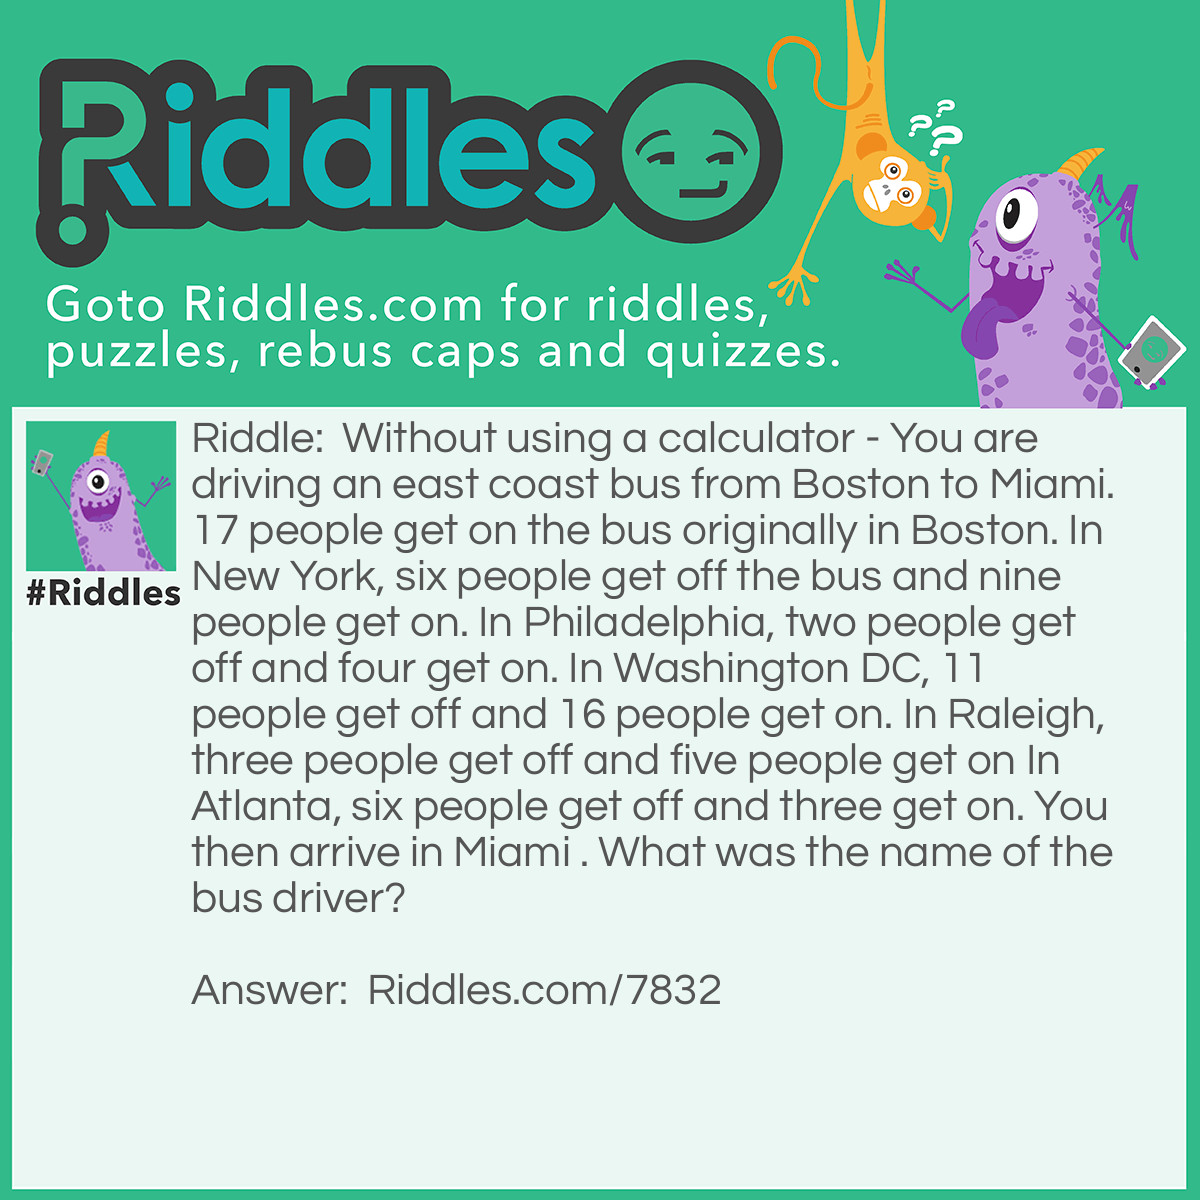 Riddle: Without using a calculator - You are driving an east coast bus from Boston to Miami. 17 people get on the bus originally in Boston. In New York, six people get off the bus and nine people get on. In Philadelphia, two people get off and four get on. In Washington DC, 11 people get off and 16 people get on. In Raleigh, three people get off and five people get on In Atlanta, six people get off and three get on. You then arrive in Miami . What was the name of the bus driver? Answer: Don't you remember your own name? It was YOU!!